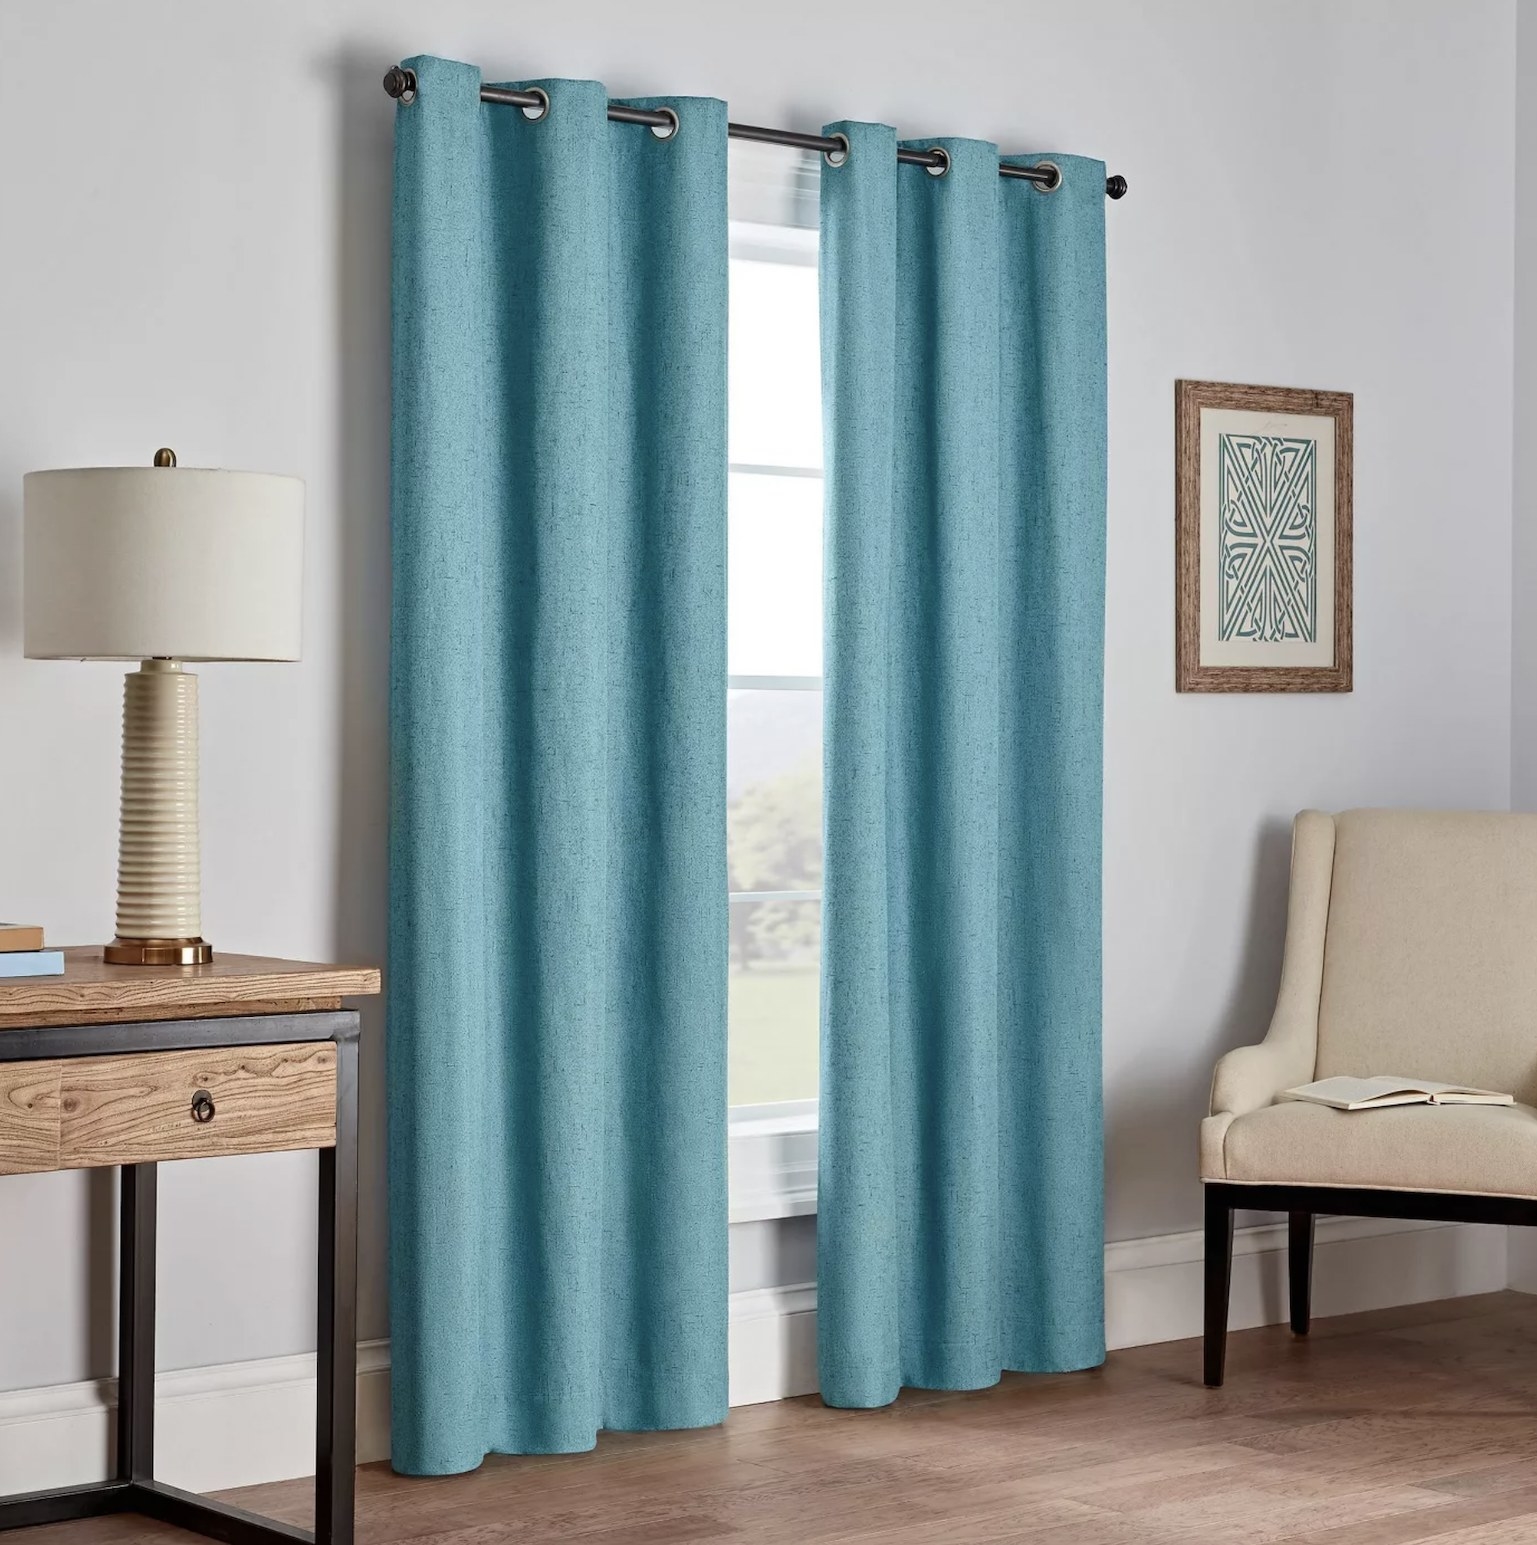 The blackout curtains in a pretty blue color